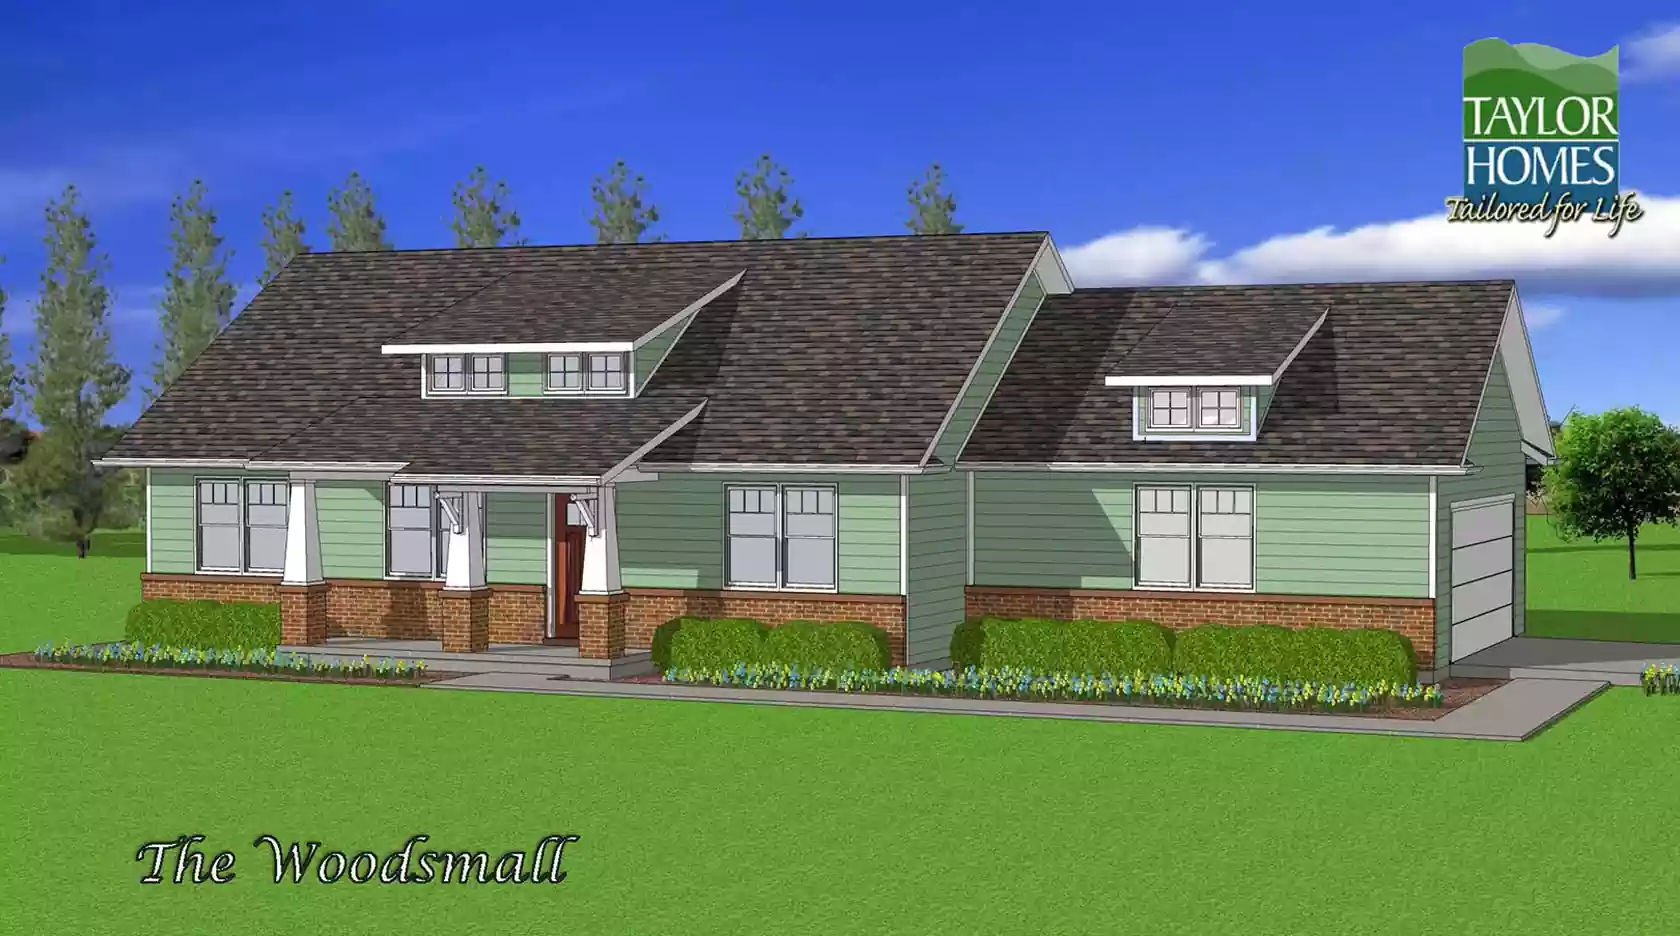 The Woodsmall Craftsman Style Home For Taylor Homes